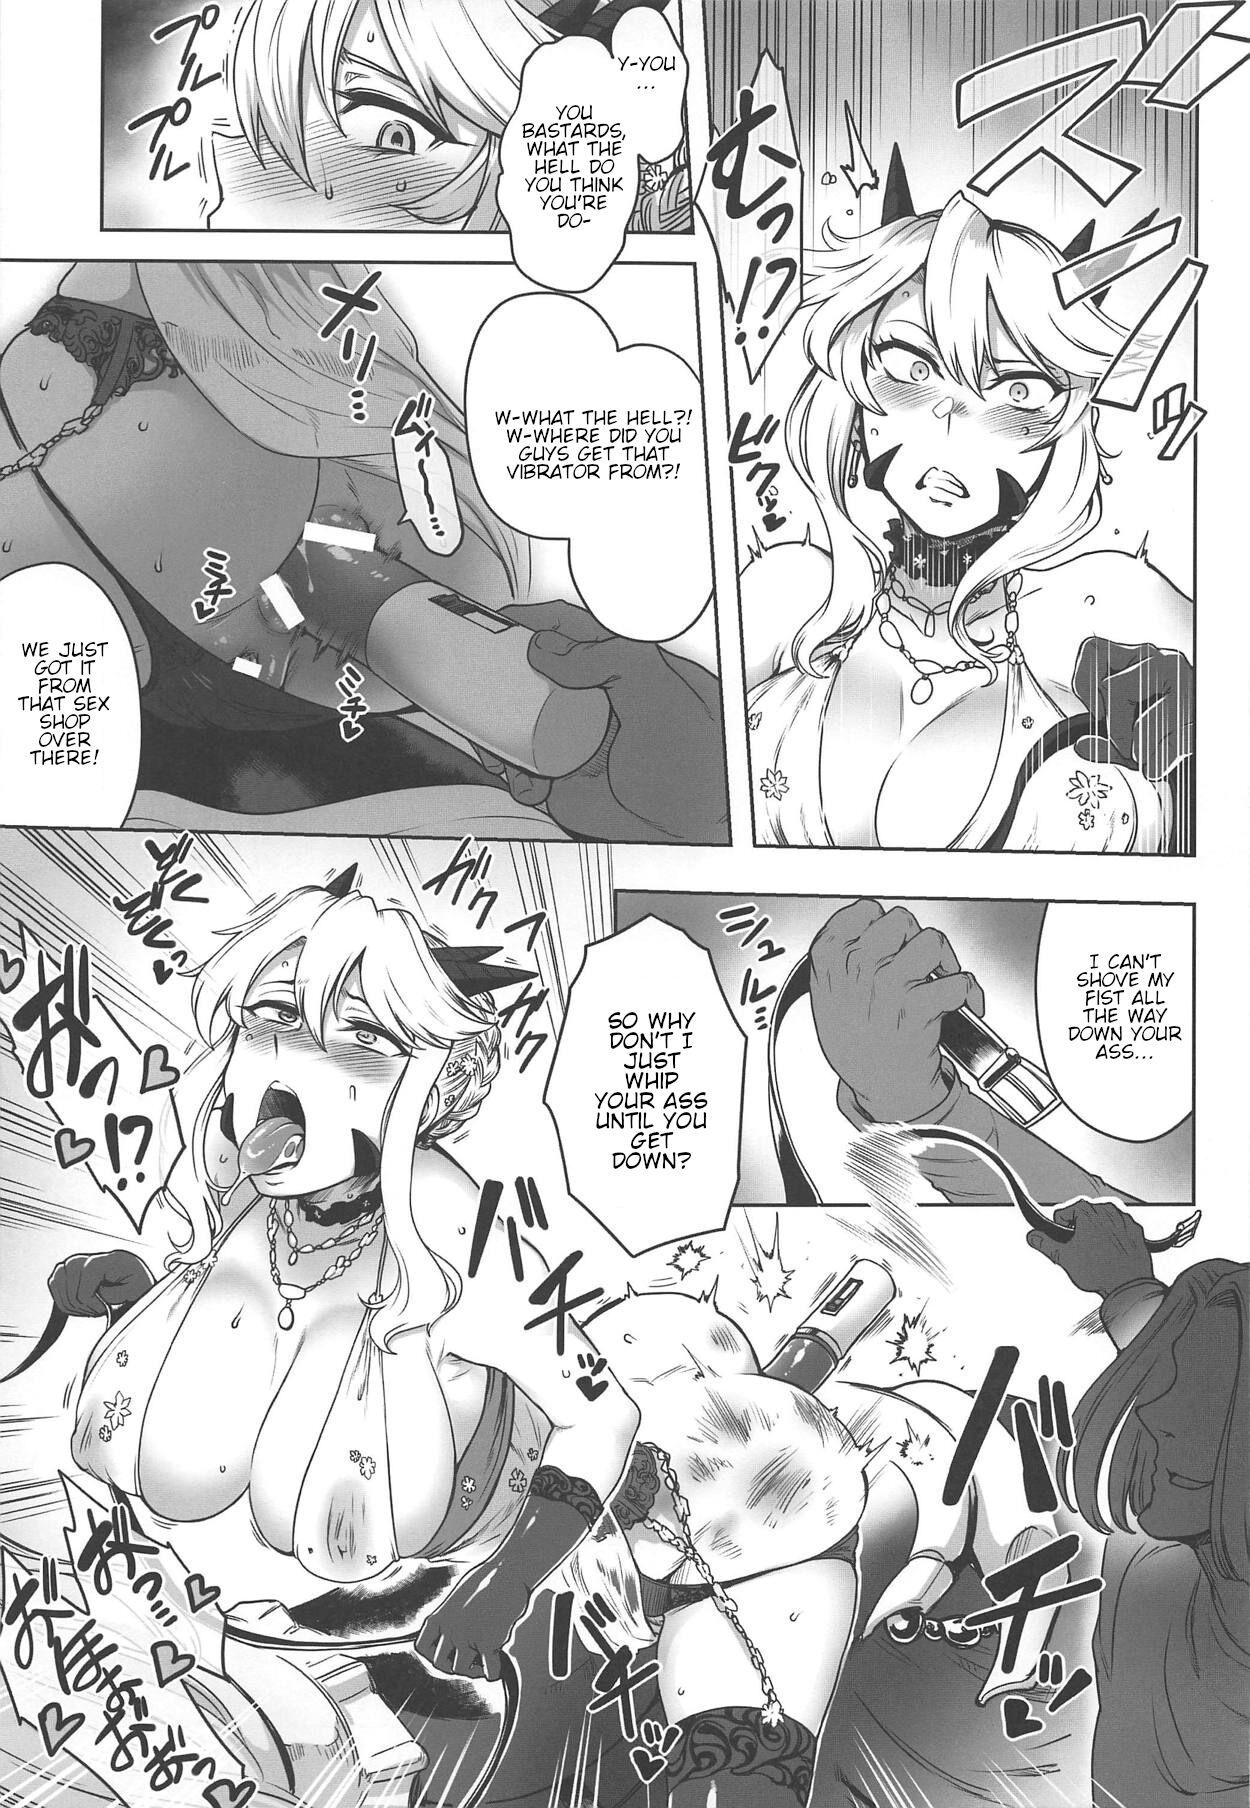 Throat Fuck Dosukebe Halloween Parade - Fate grand order Ex Girlfriends - Page 8